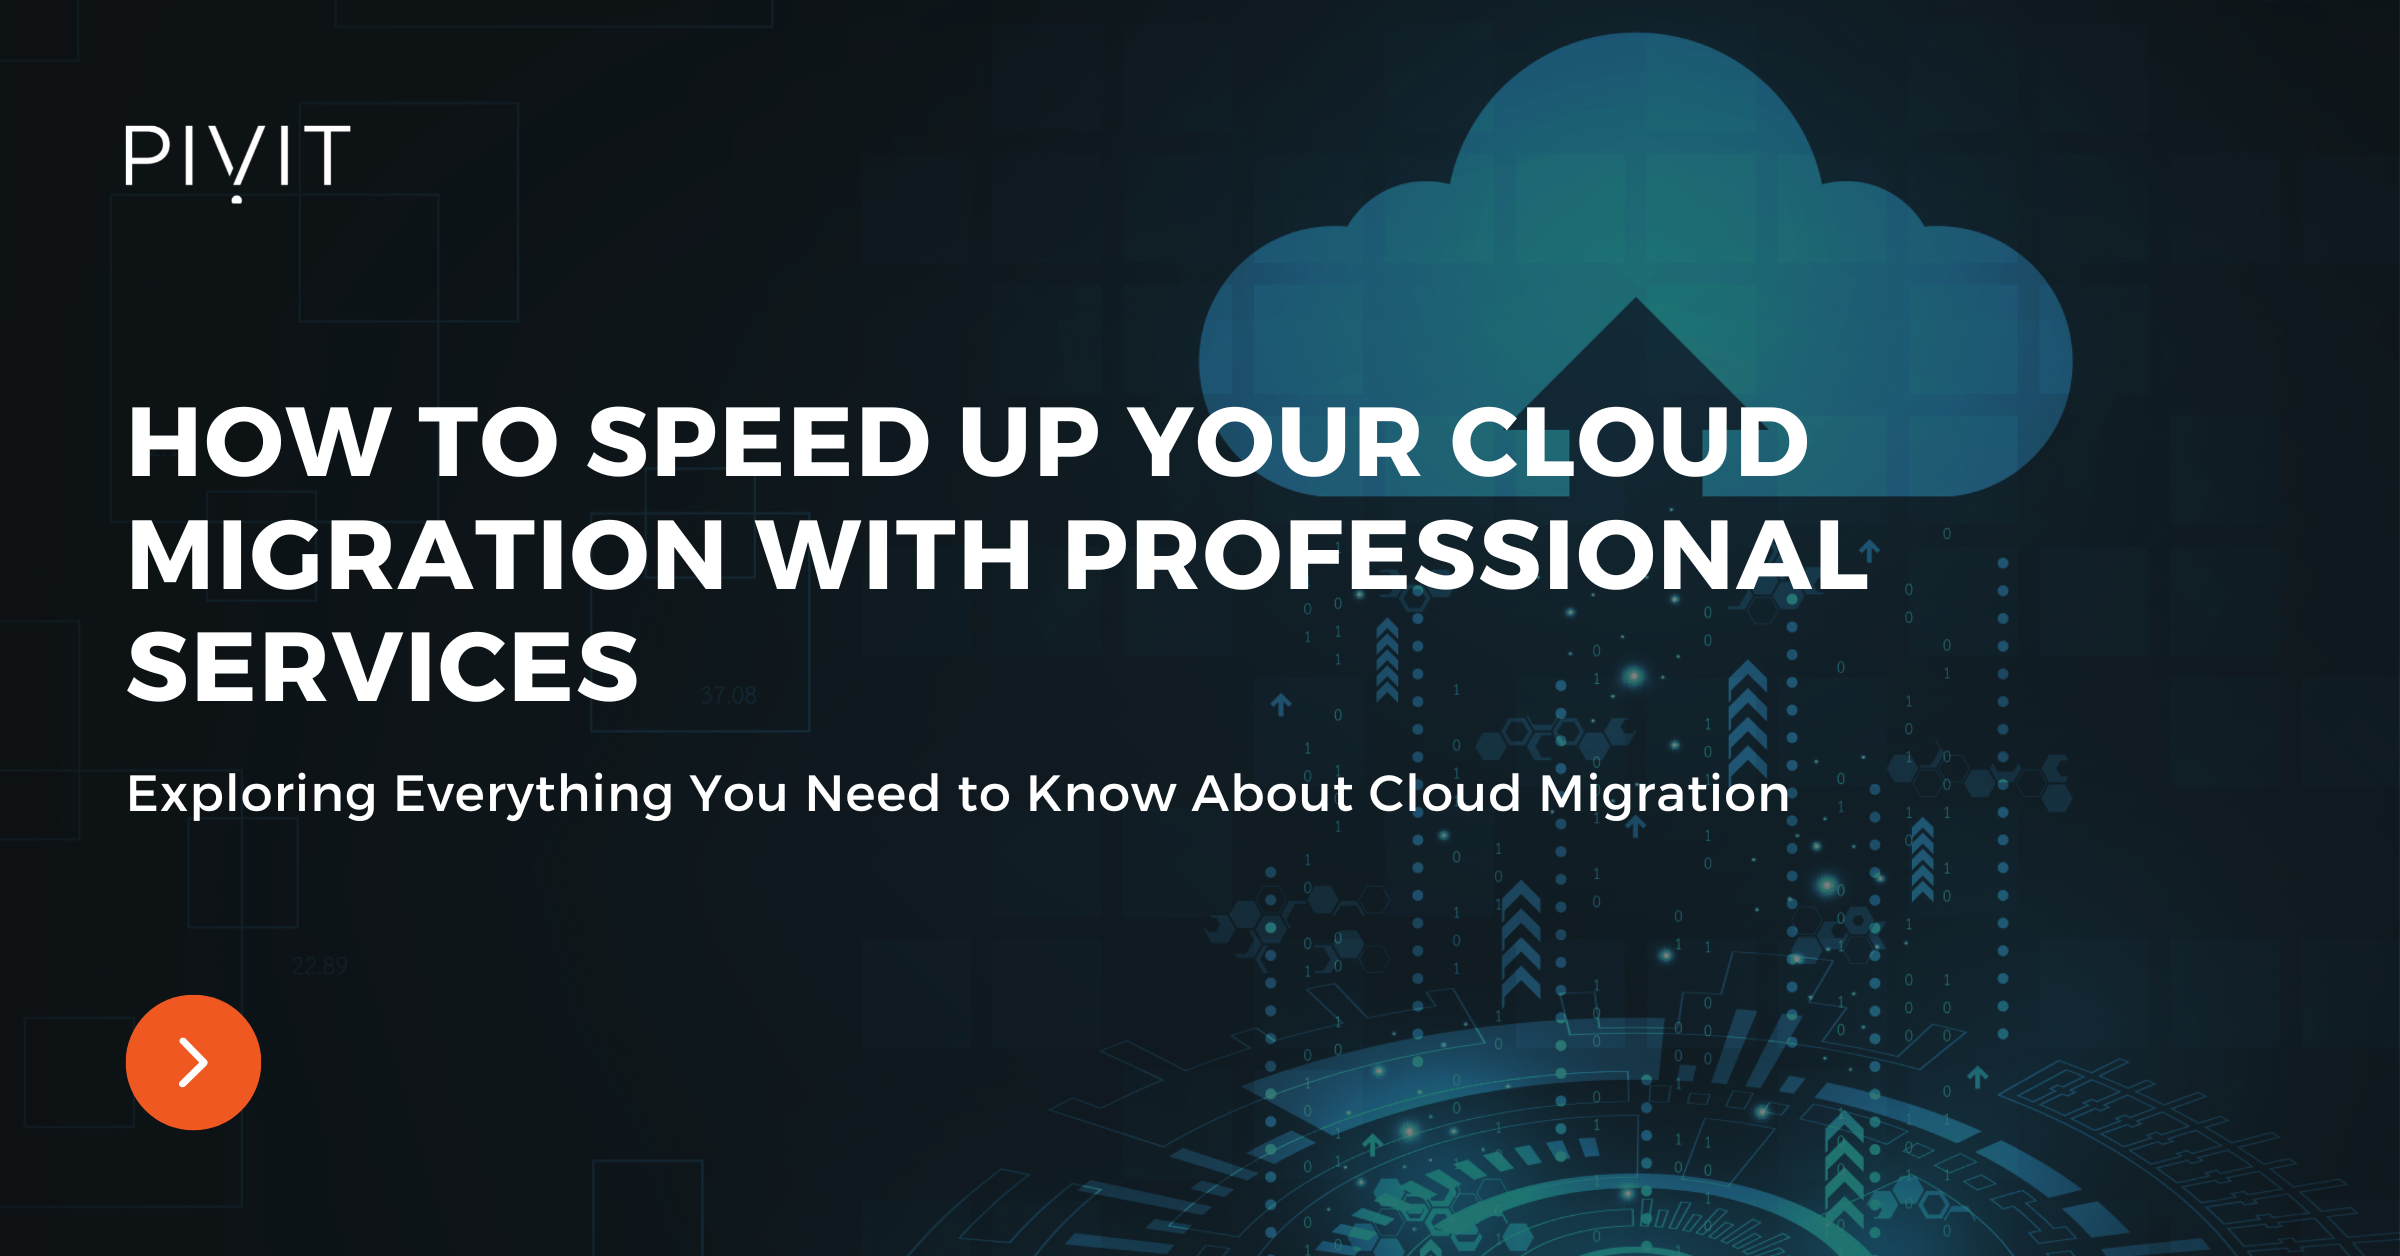 How to Speed Up Your Cloud Migration With Professional Services